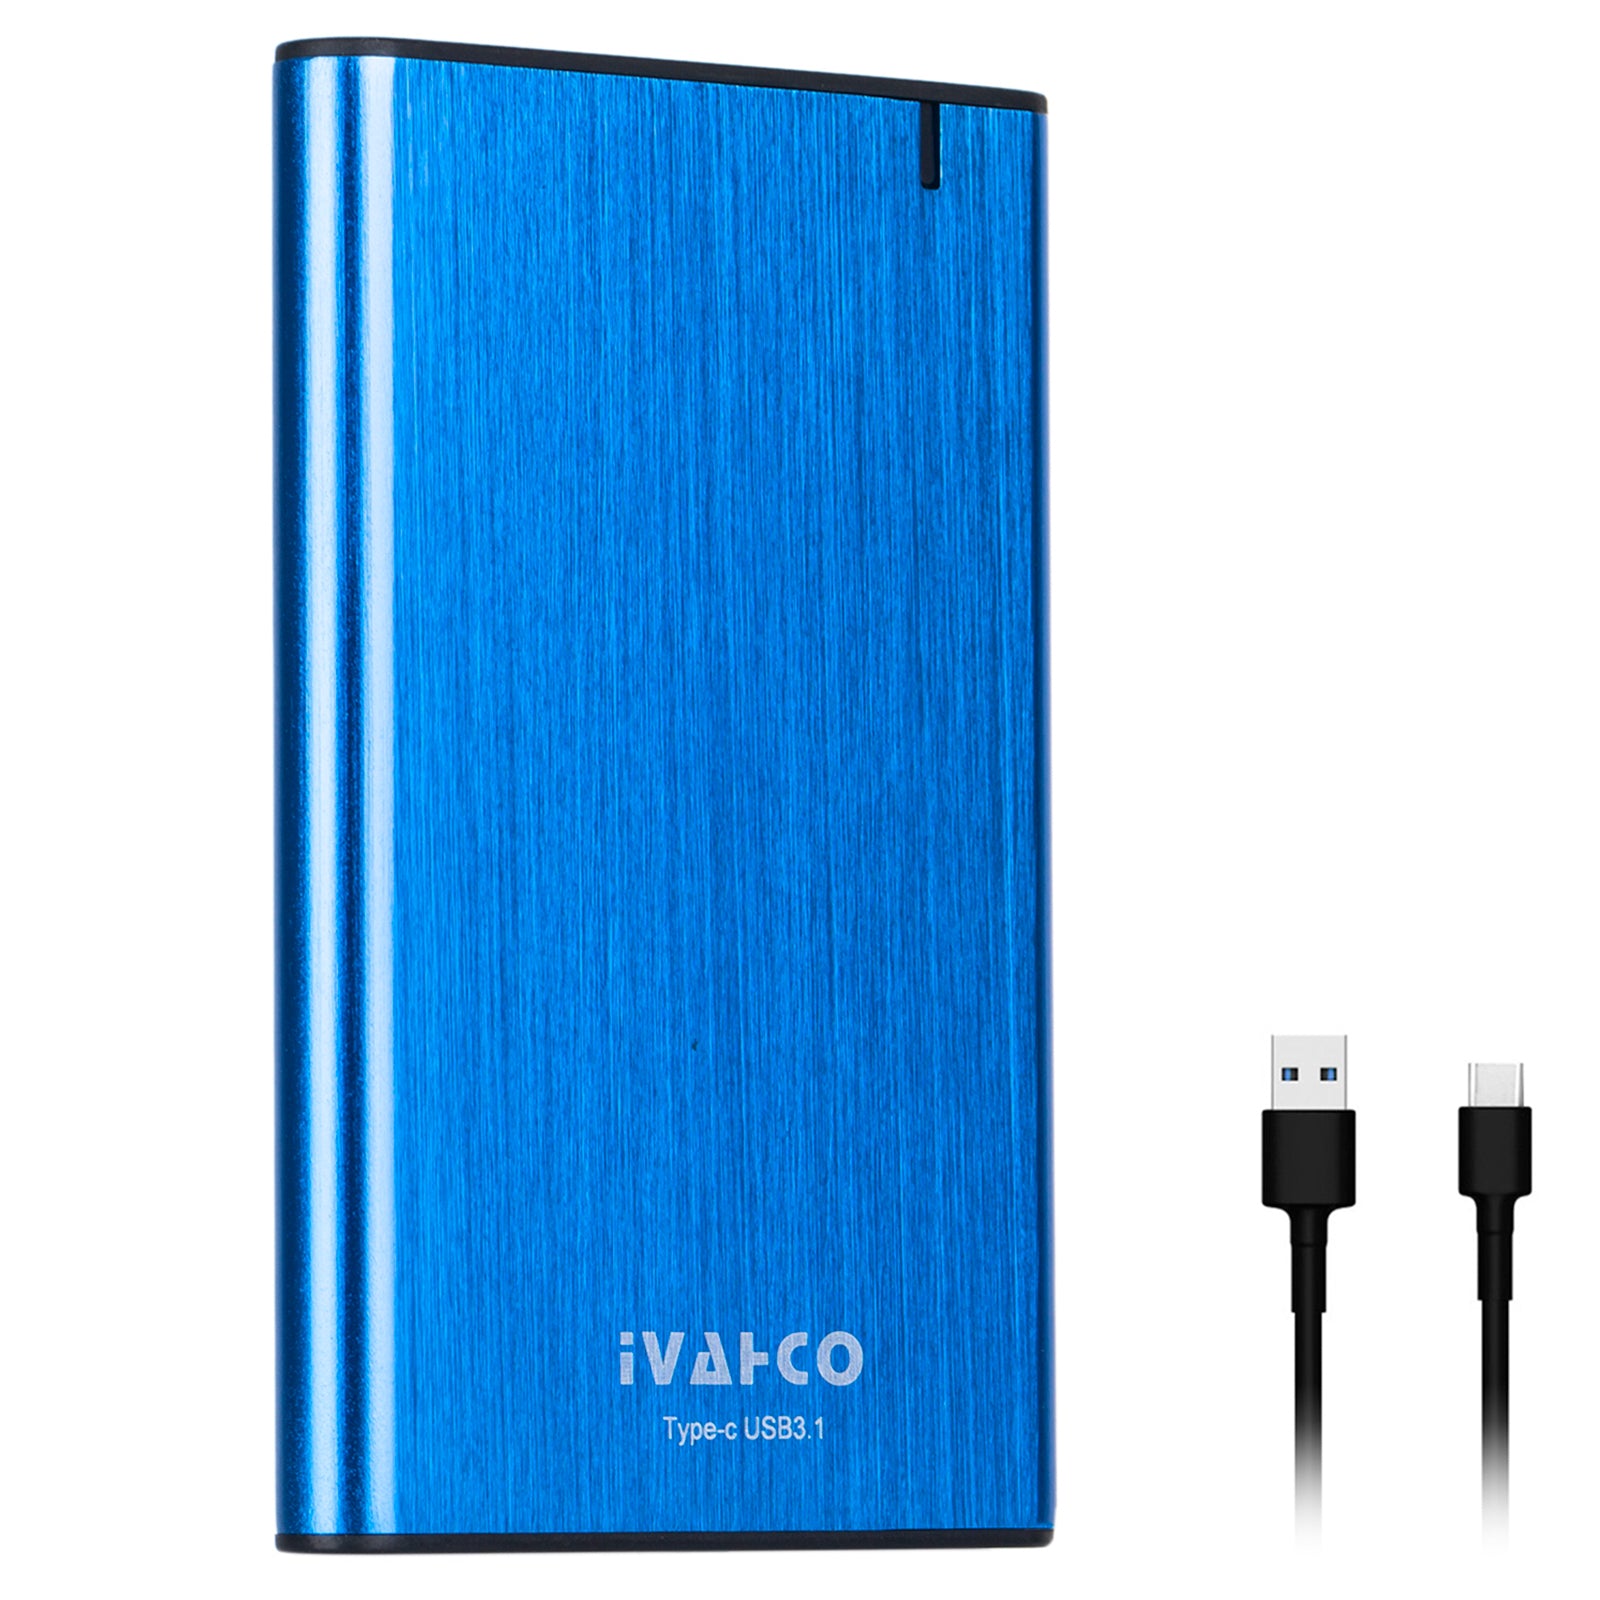 IVAHCO 500GB Type-C USB3.1 2.5" HDD External Case Brushed Metal Solid State Drive Enclosure with Indicator - Blue